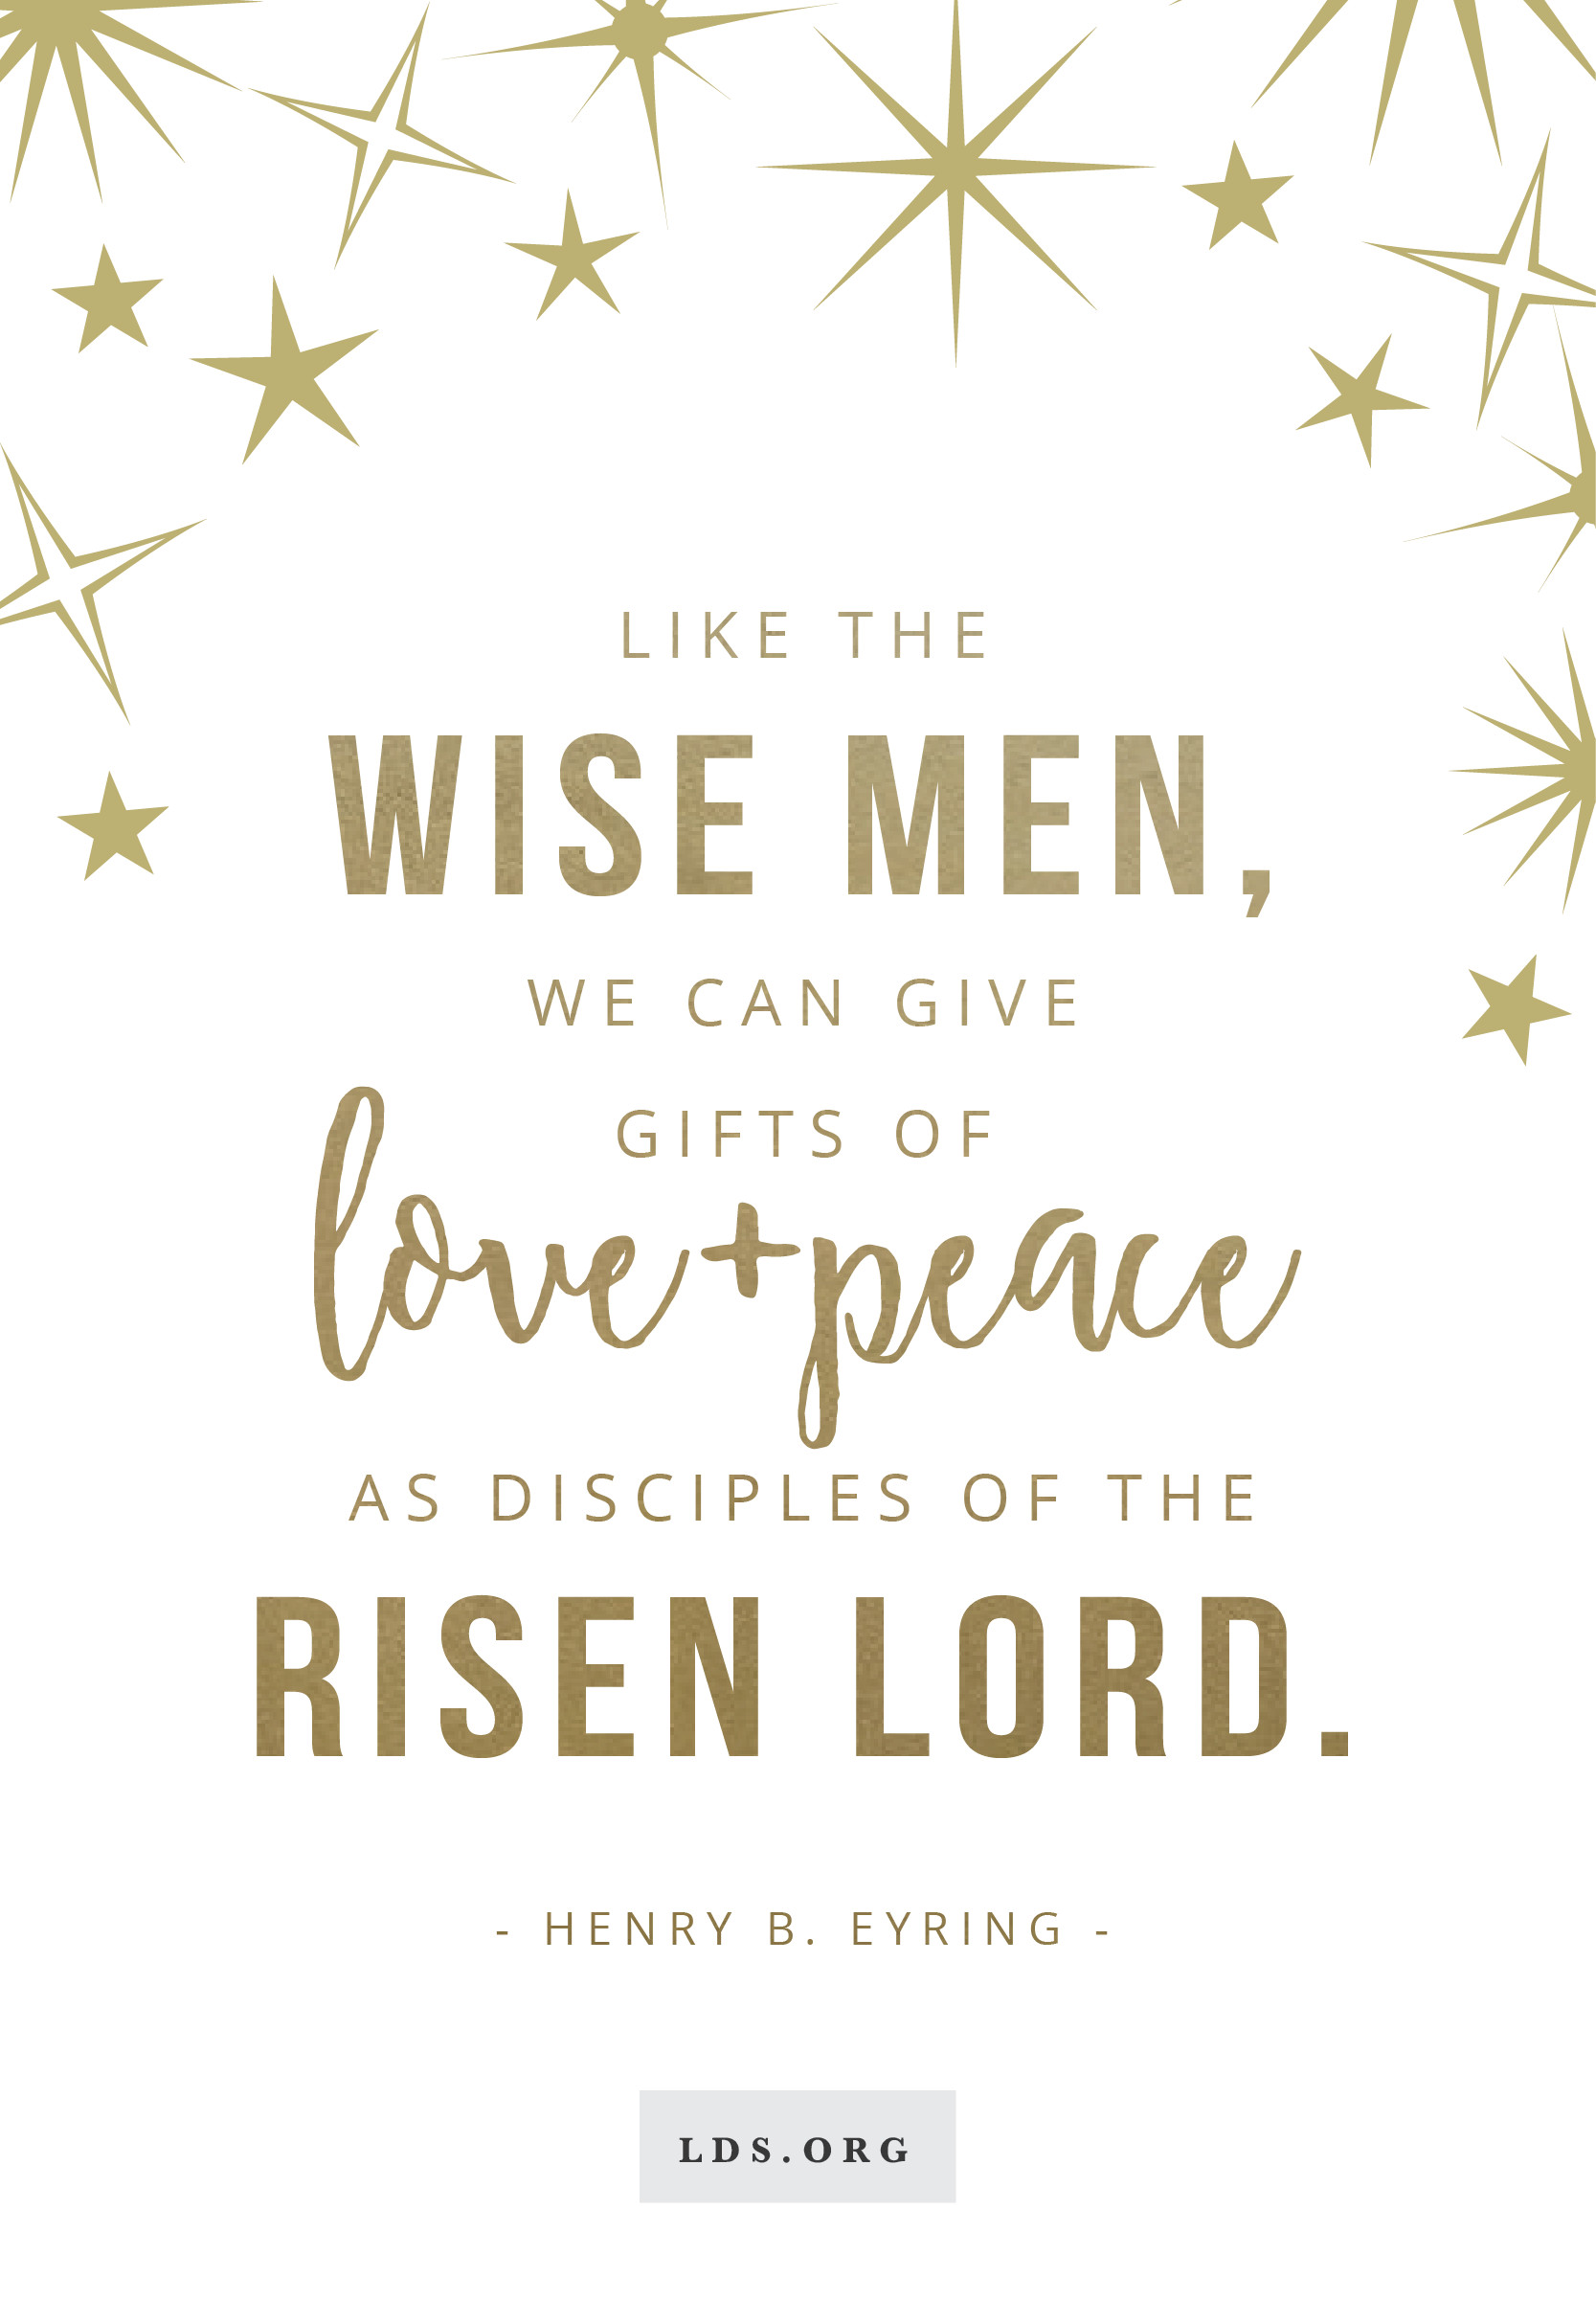 Lds Christmas Quotes
 Like the Wise Men we can give ts of love and peace as